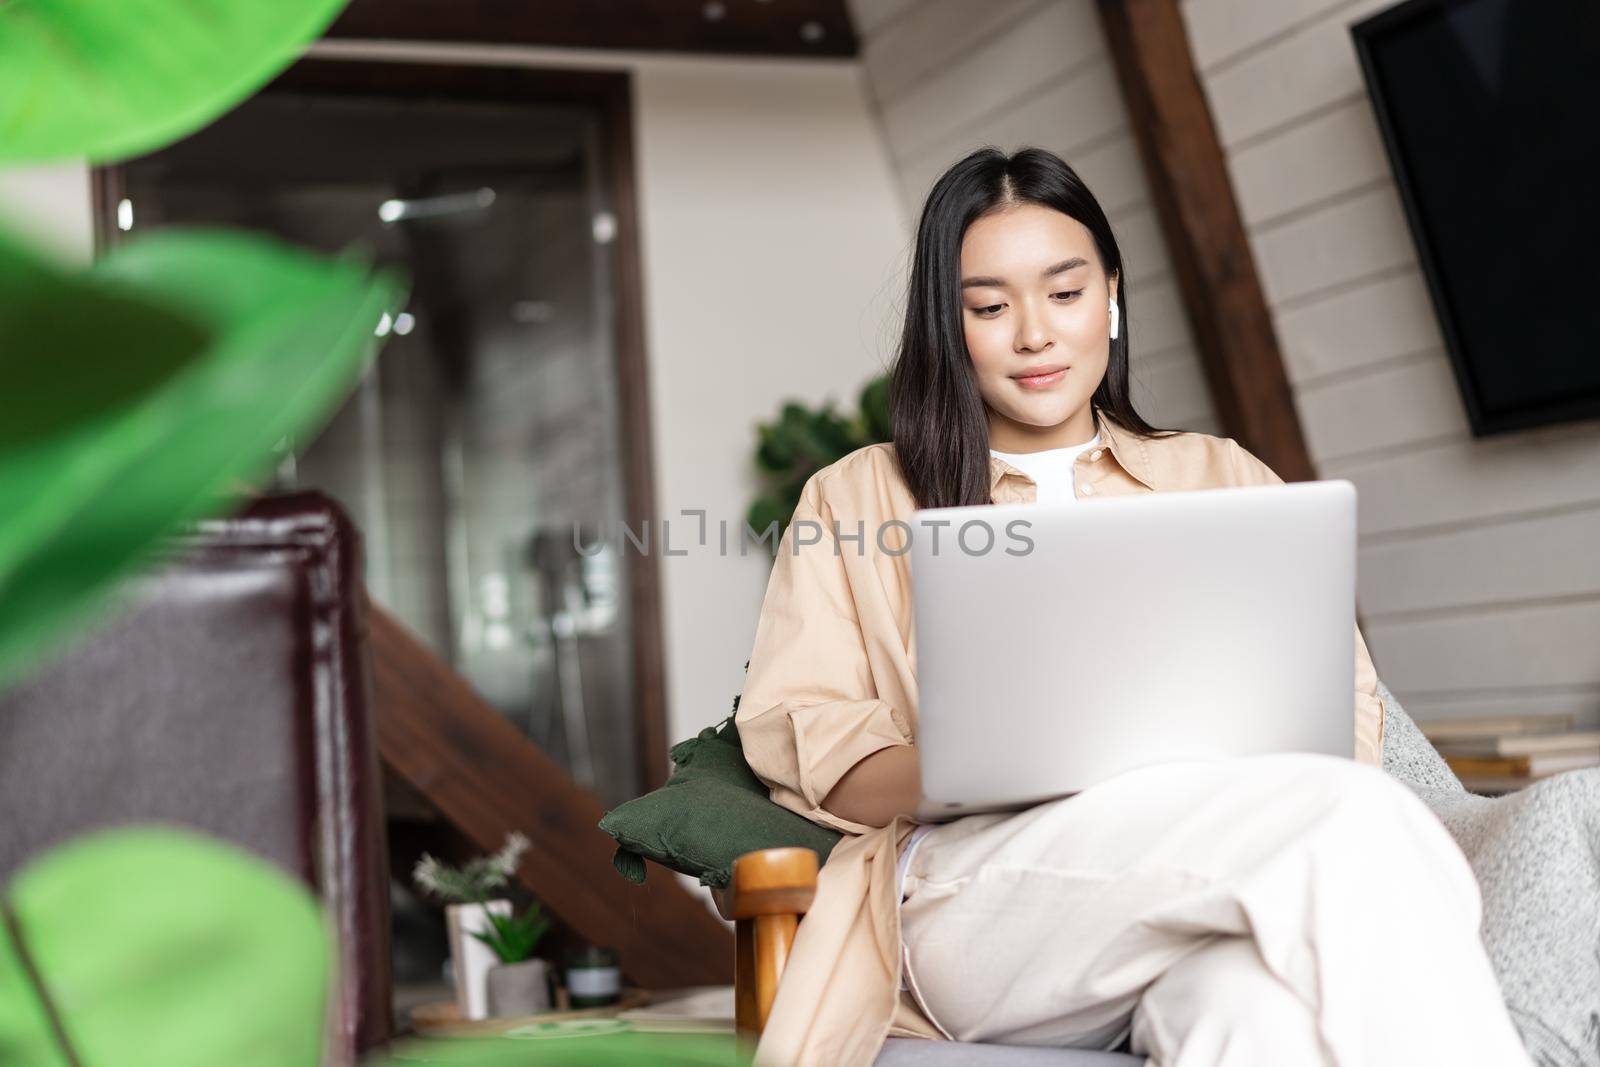 Young asian girl watching webinar on laptop. Girl relaxing with computer in hands at home, sitting on chair resting.